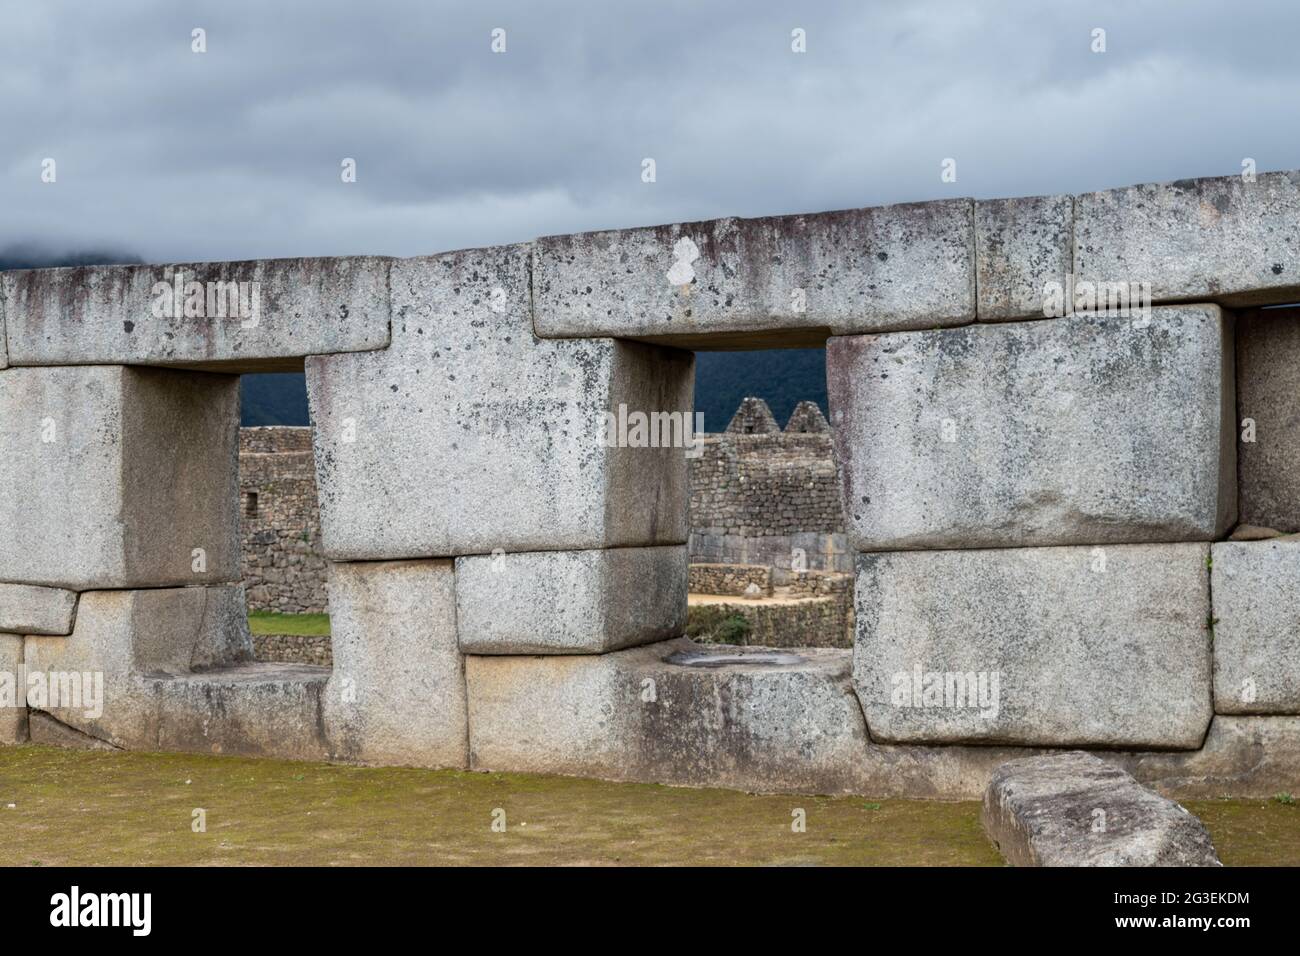 Temple of the three windows, Machu Picchu archaeological complex, Sacred Valley, Peru Stock Photo